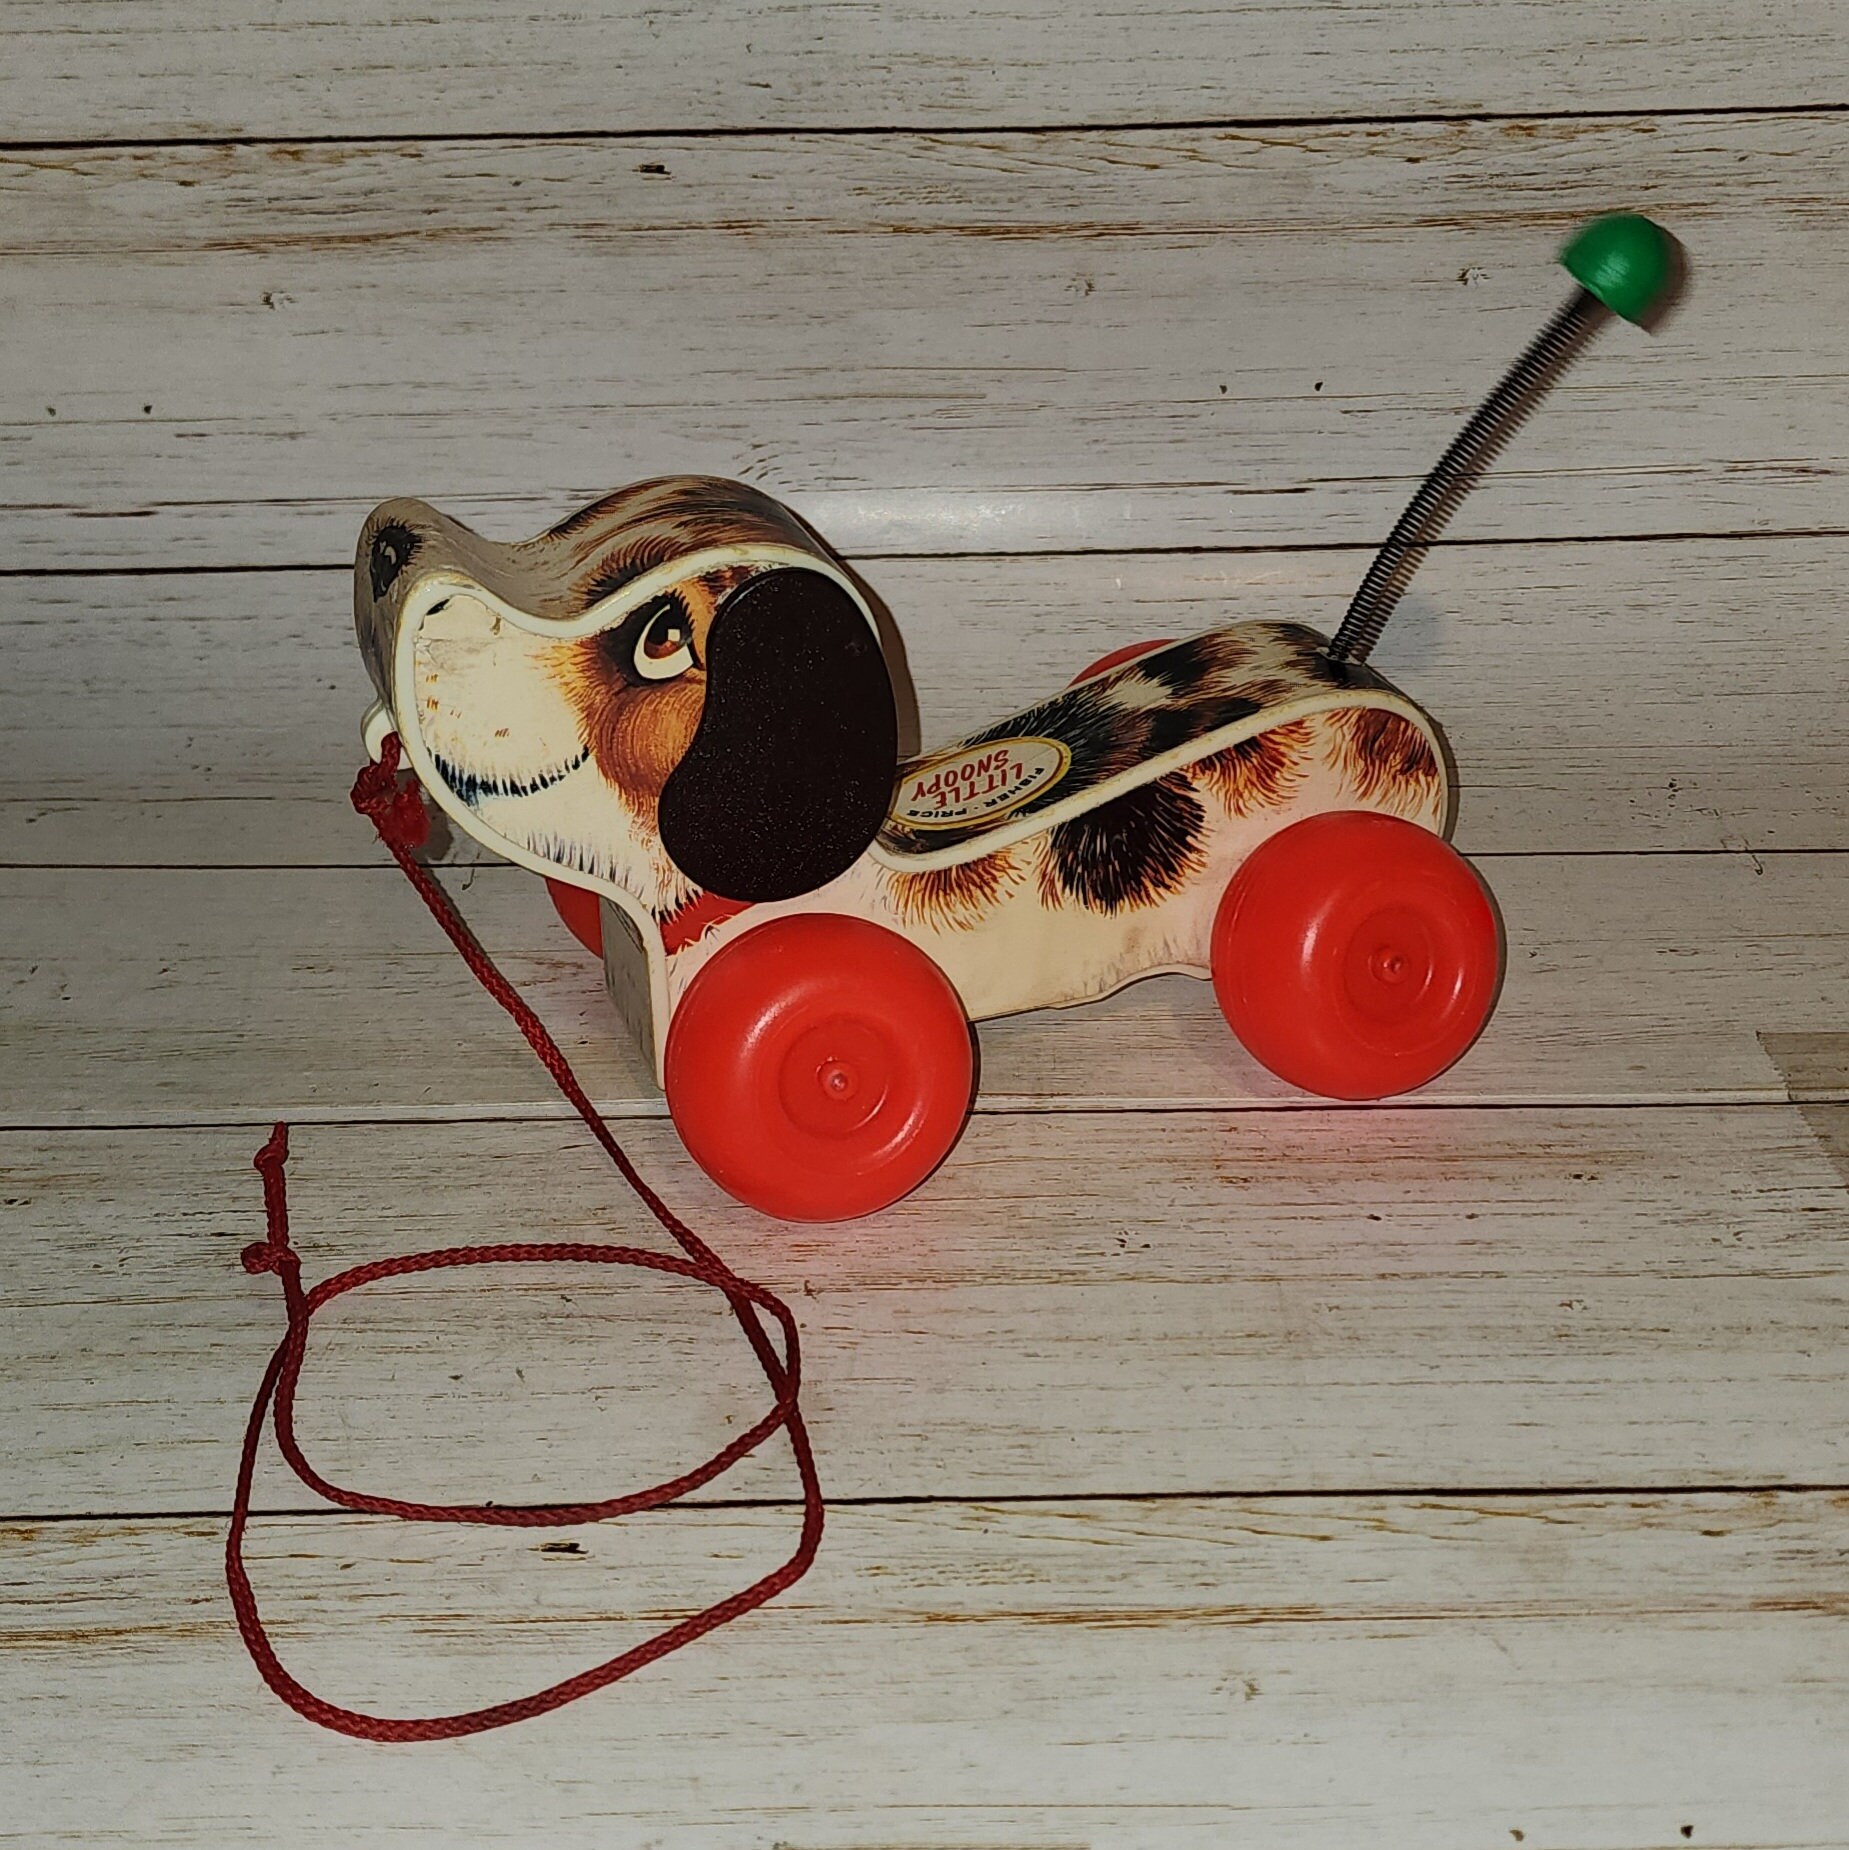 Beagle, Hound Dog, Rubber Canine, Hand Painted, Realistic Toy Figure,  Model, Replica, Kids, Educational, Gift, 3 CH230 BB119